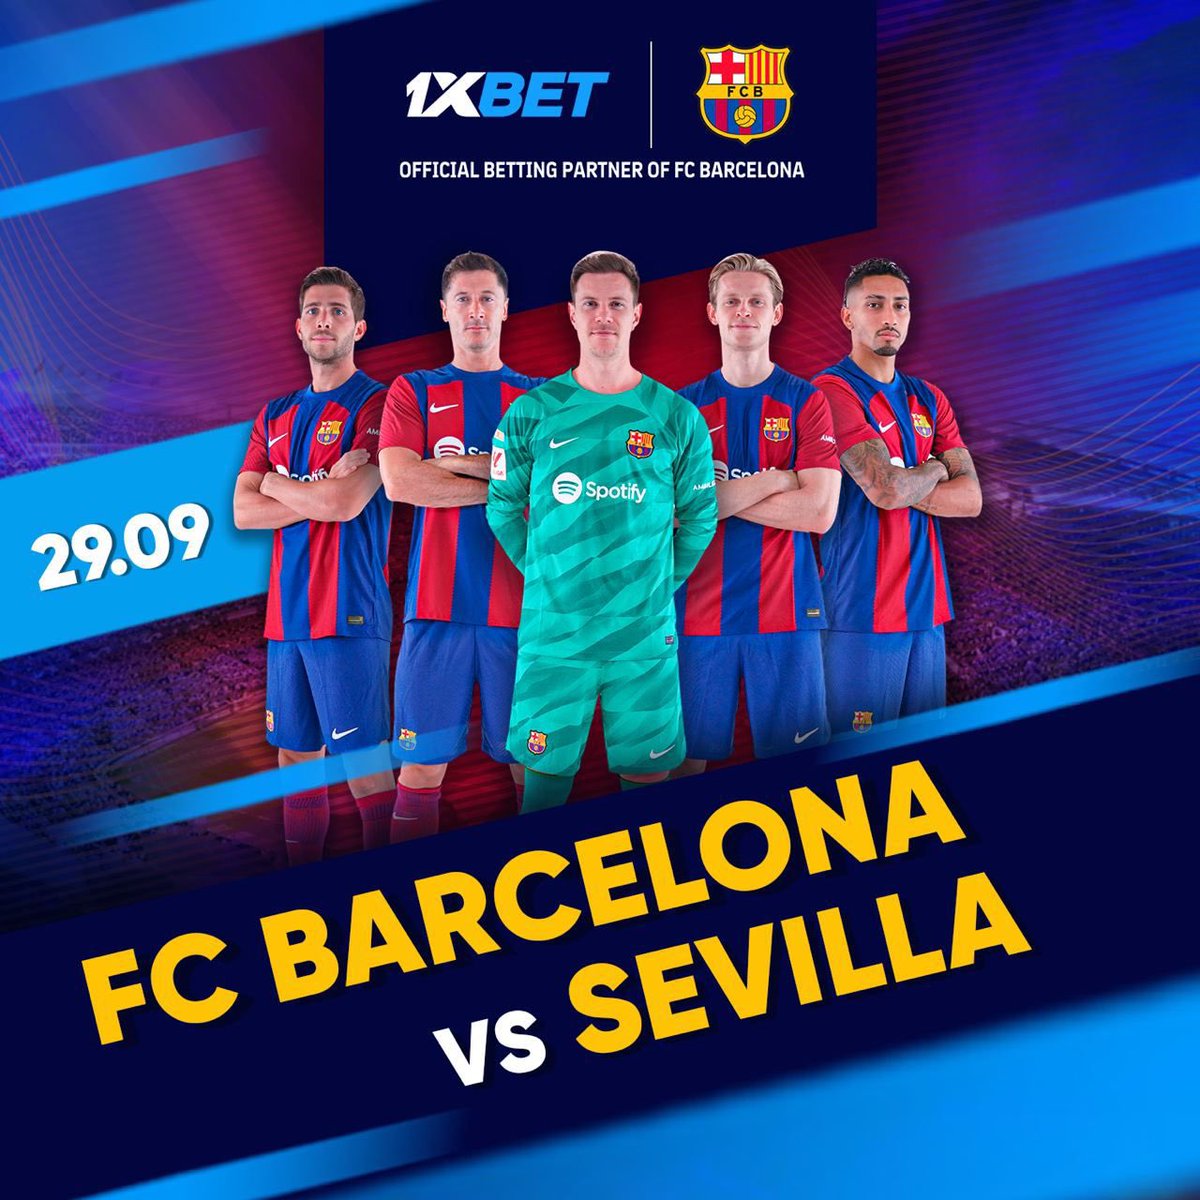 🇪🇸Classy showdown: Barcelona vs Sevilla 

Bet on Primera and catch the wave of victories together with the reliable bookmaker 1xBet!

Using the link ➡️ bit.ly/447KINS and promo code: FRANKCUTEX for bonus on your win ⚽️